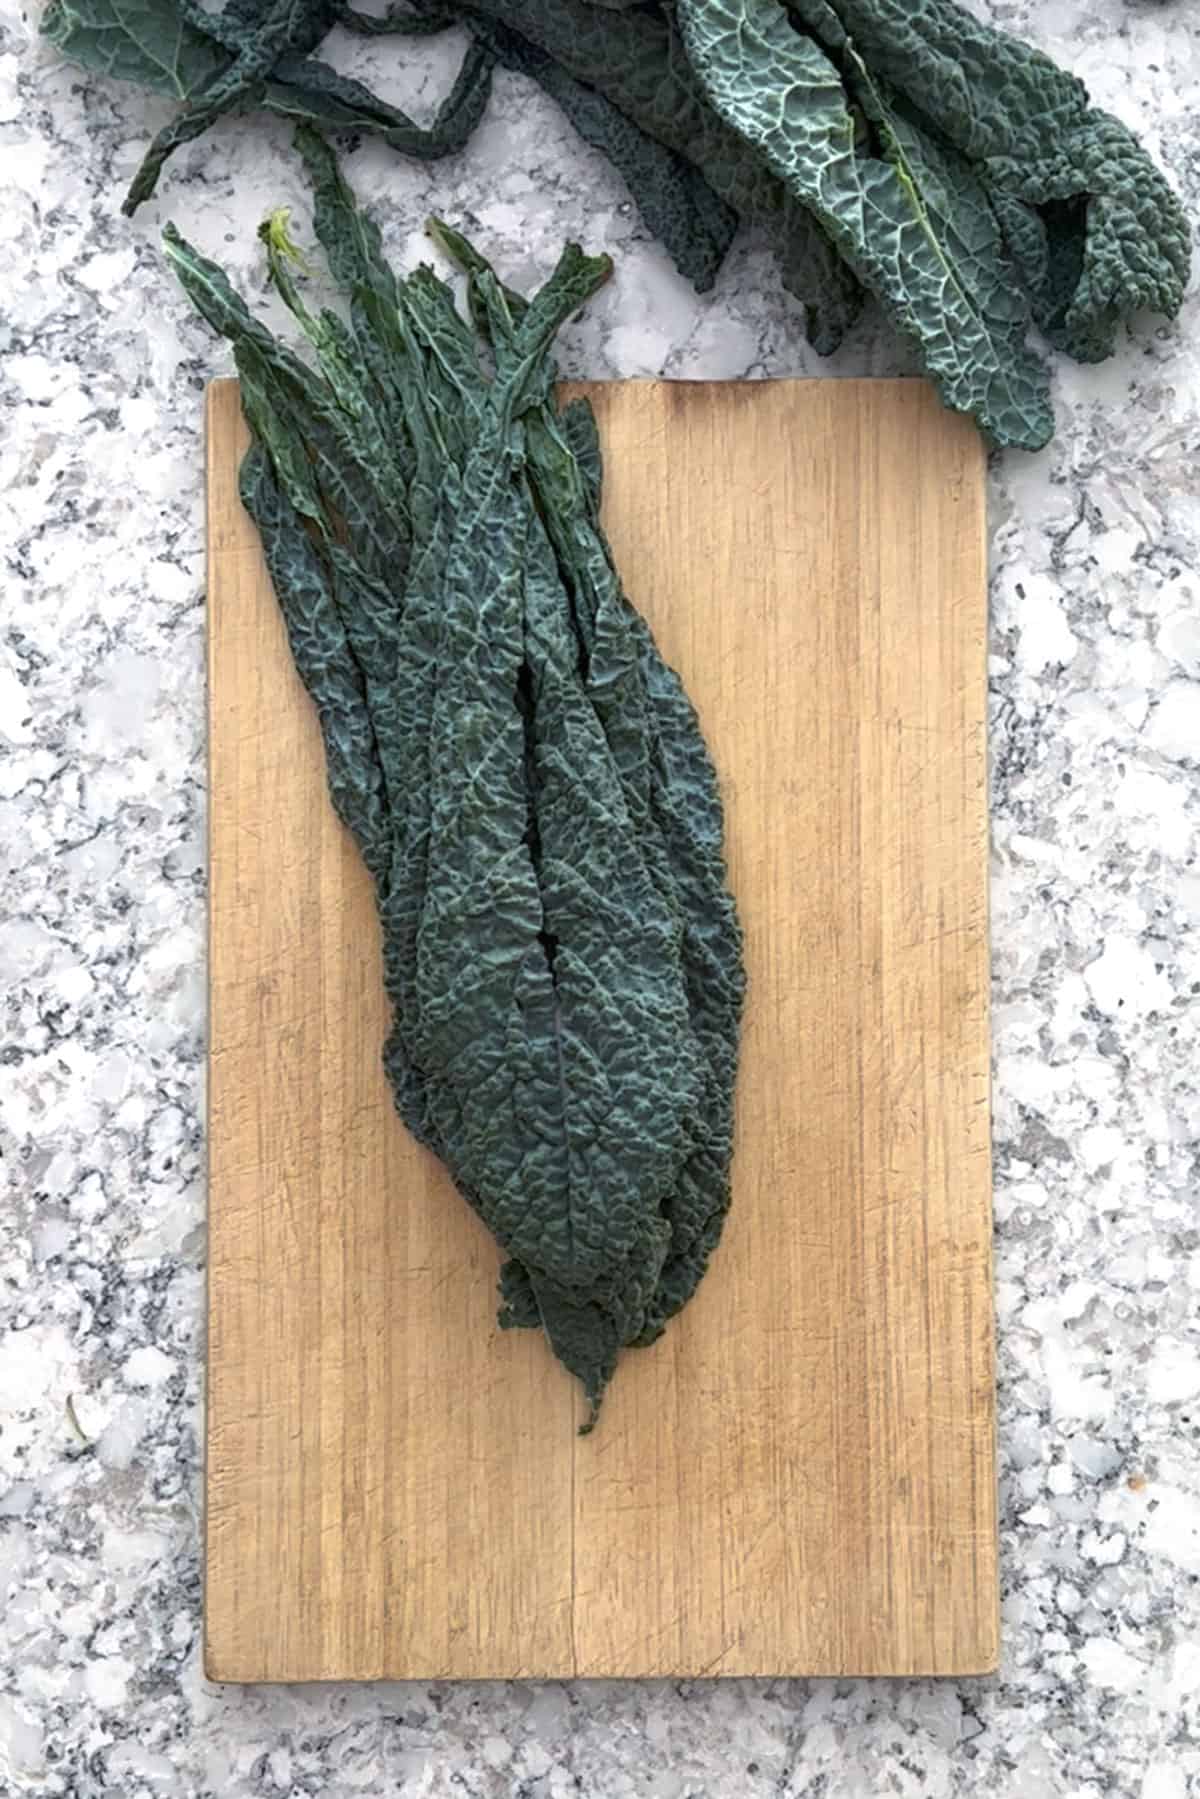 de-stemmed Tuscan kale leaves stacked up on a wooden cutting board.